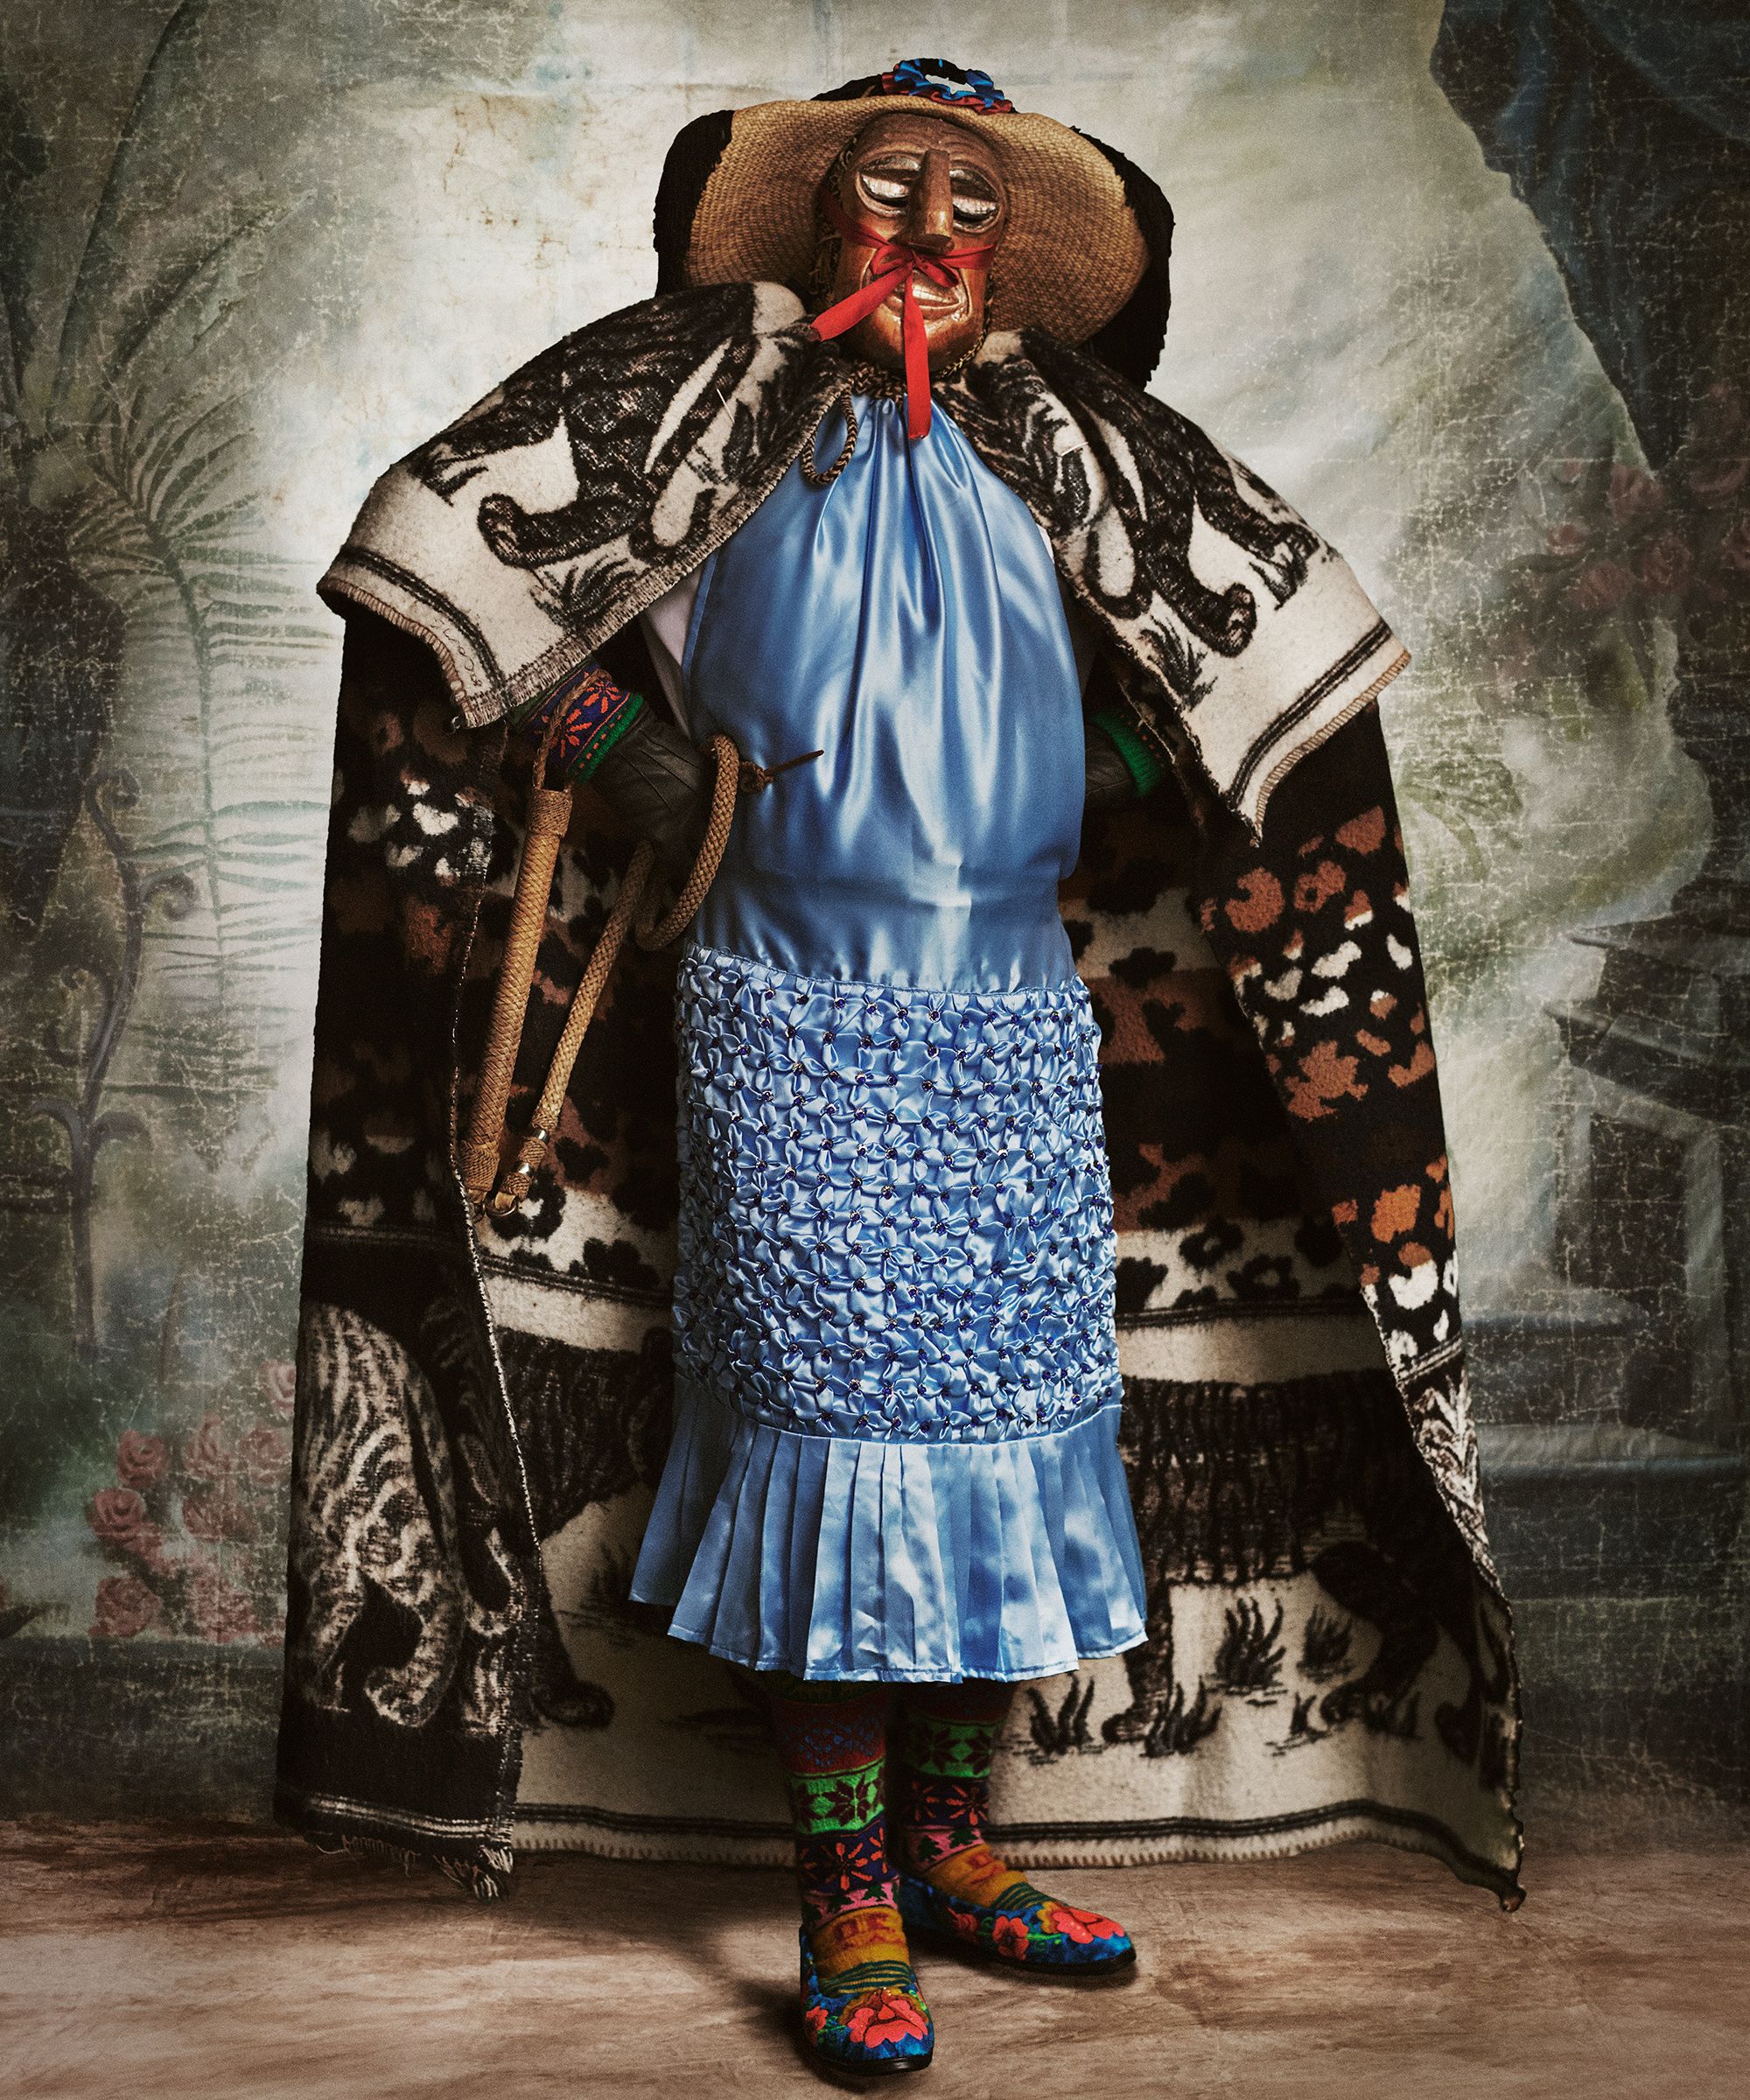 "Alta Moda", traditional costumes from Peru
MORE ABOUT THE SERIES 